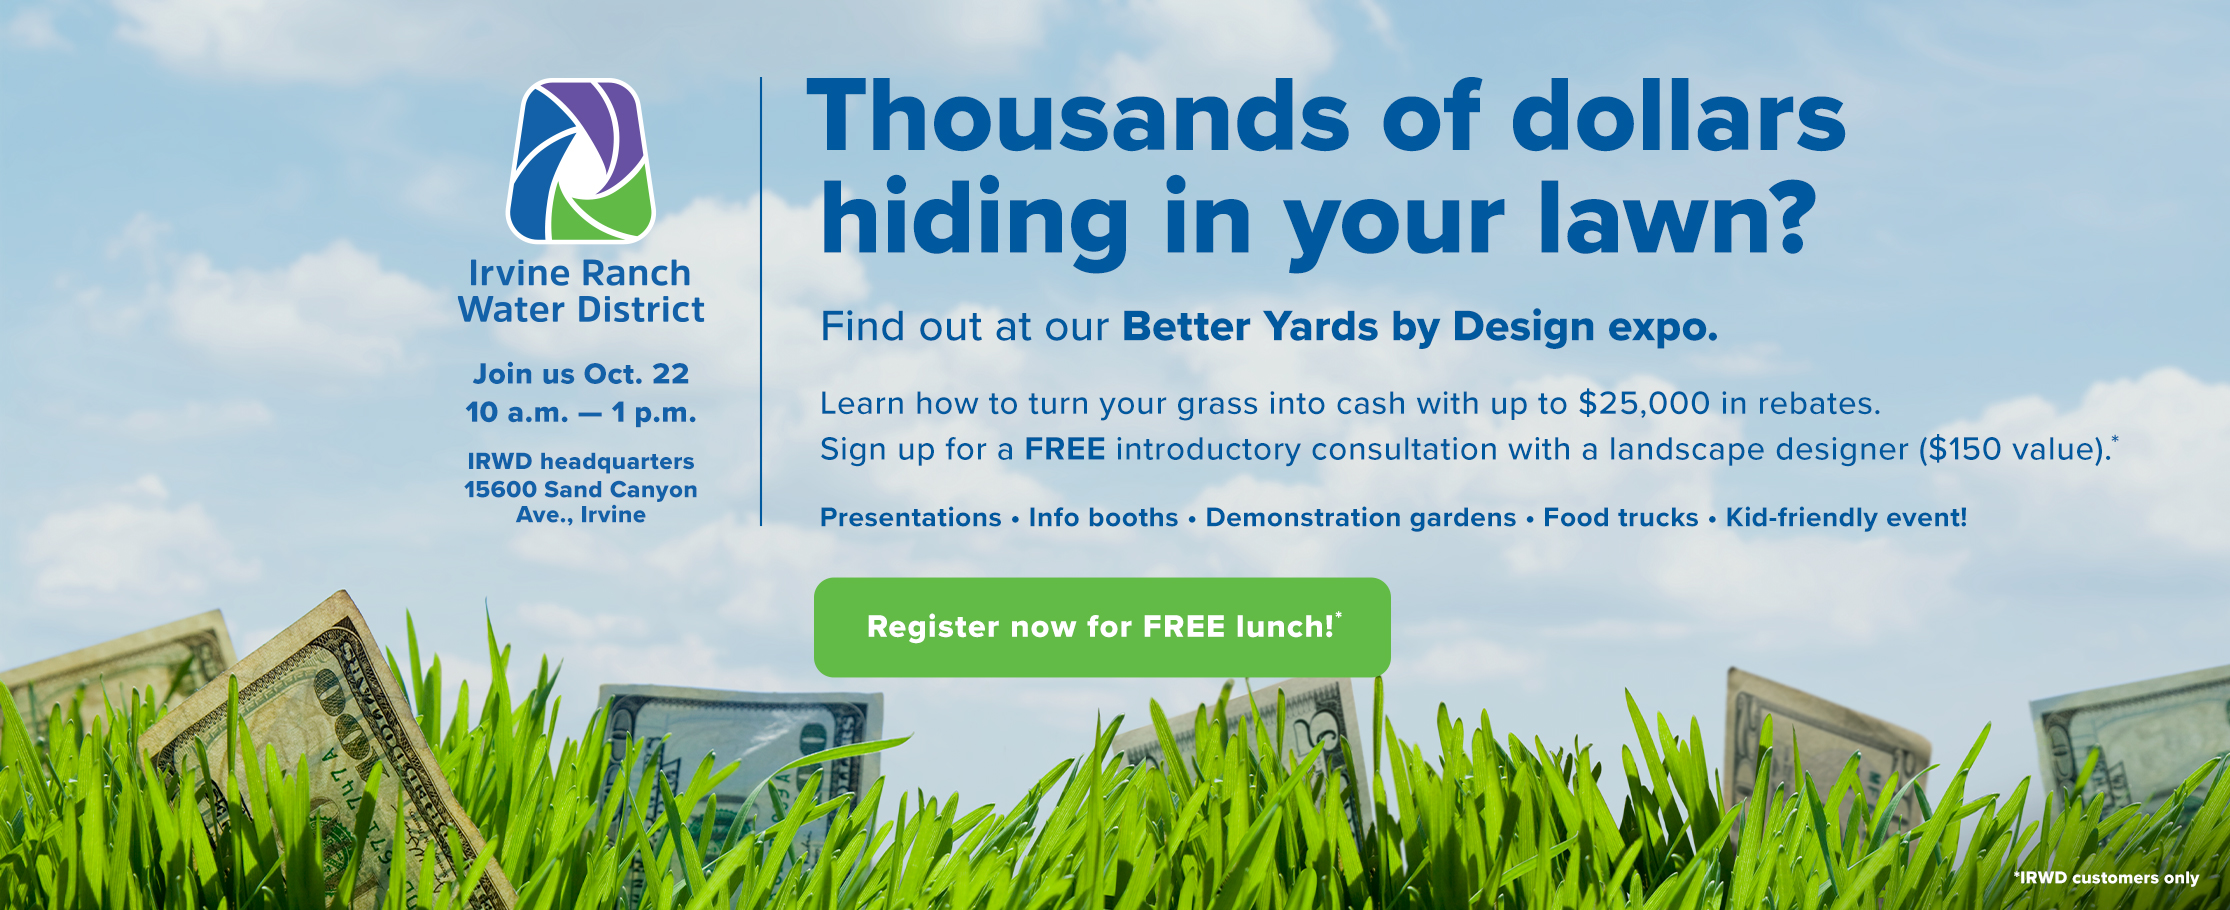 Thousands of dollars hiding in your lawn? Find out at our Better Yards by Design expo on Oct. 22. Register at irwd.com/betteryards